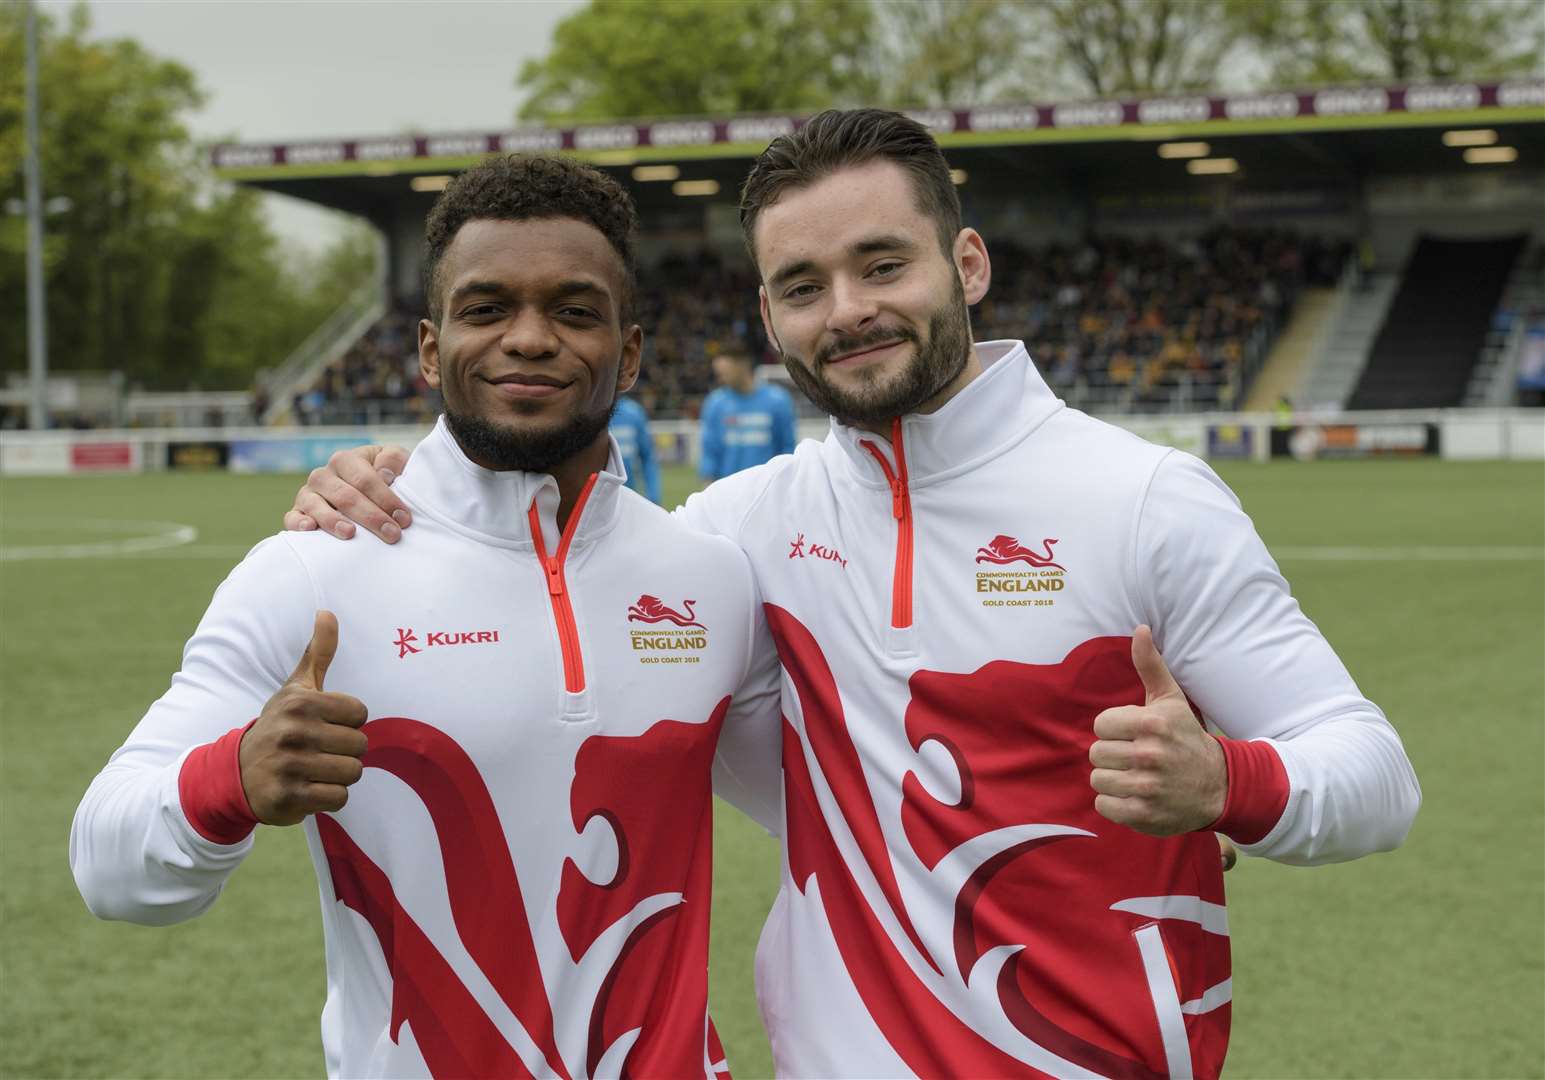 Maidstone's Commonwealth champion gymnasts, Courtney Tulloch and James Hall, led the sides out at the Gallagher Picture: Andy Payton